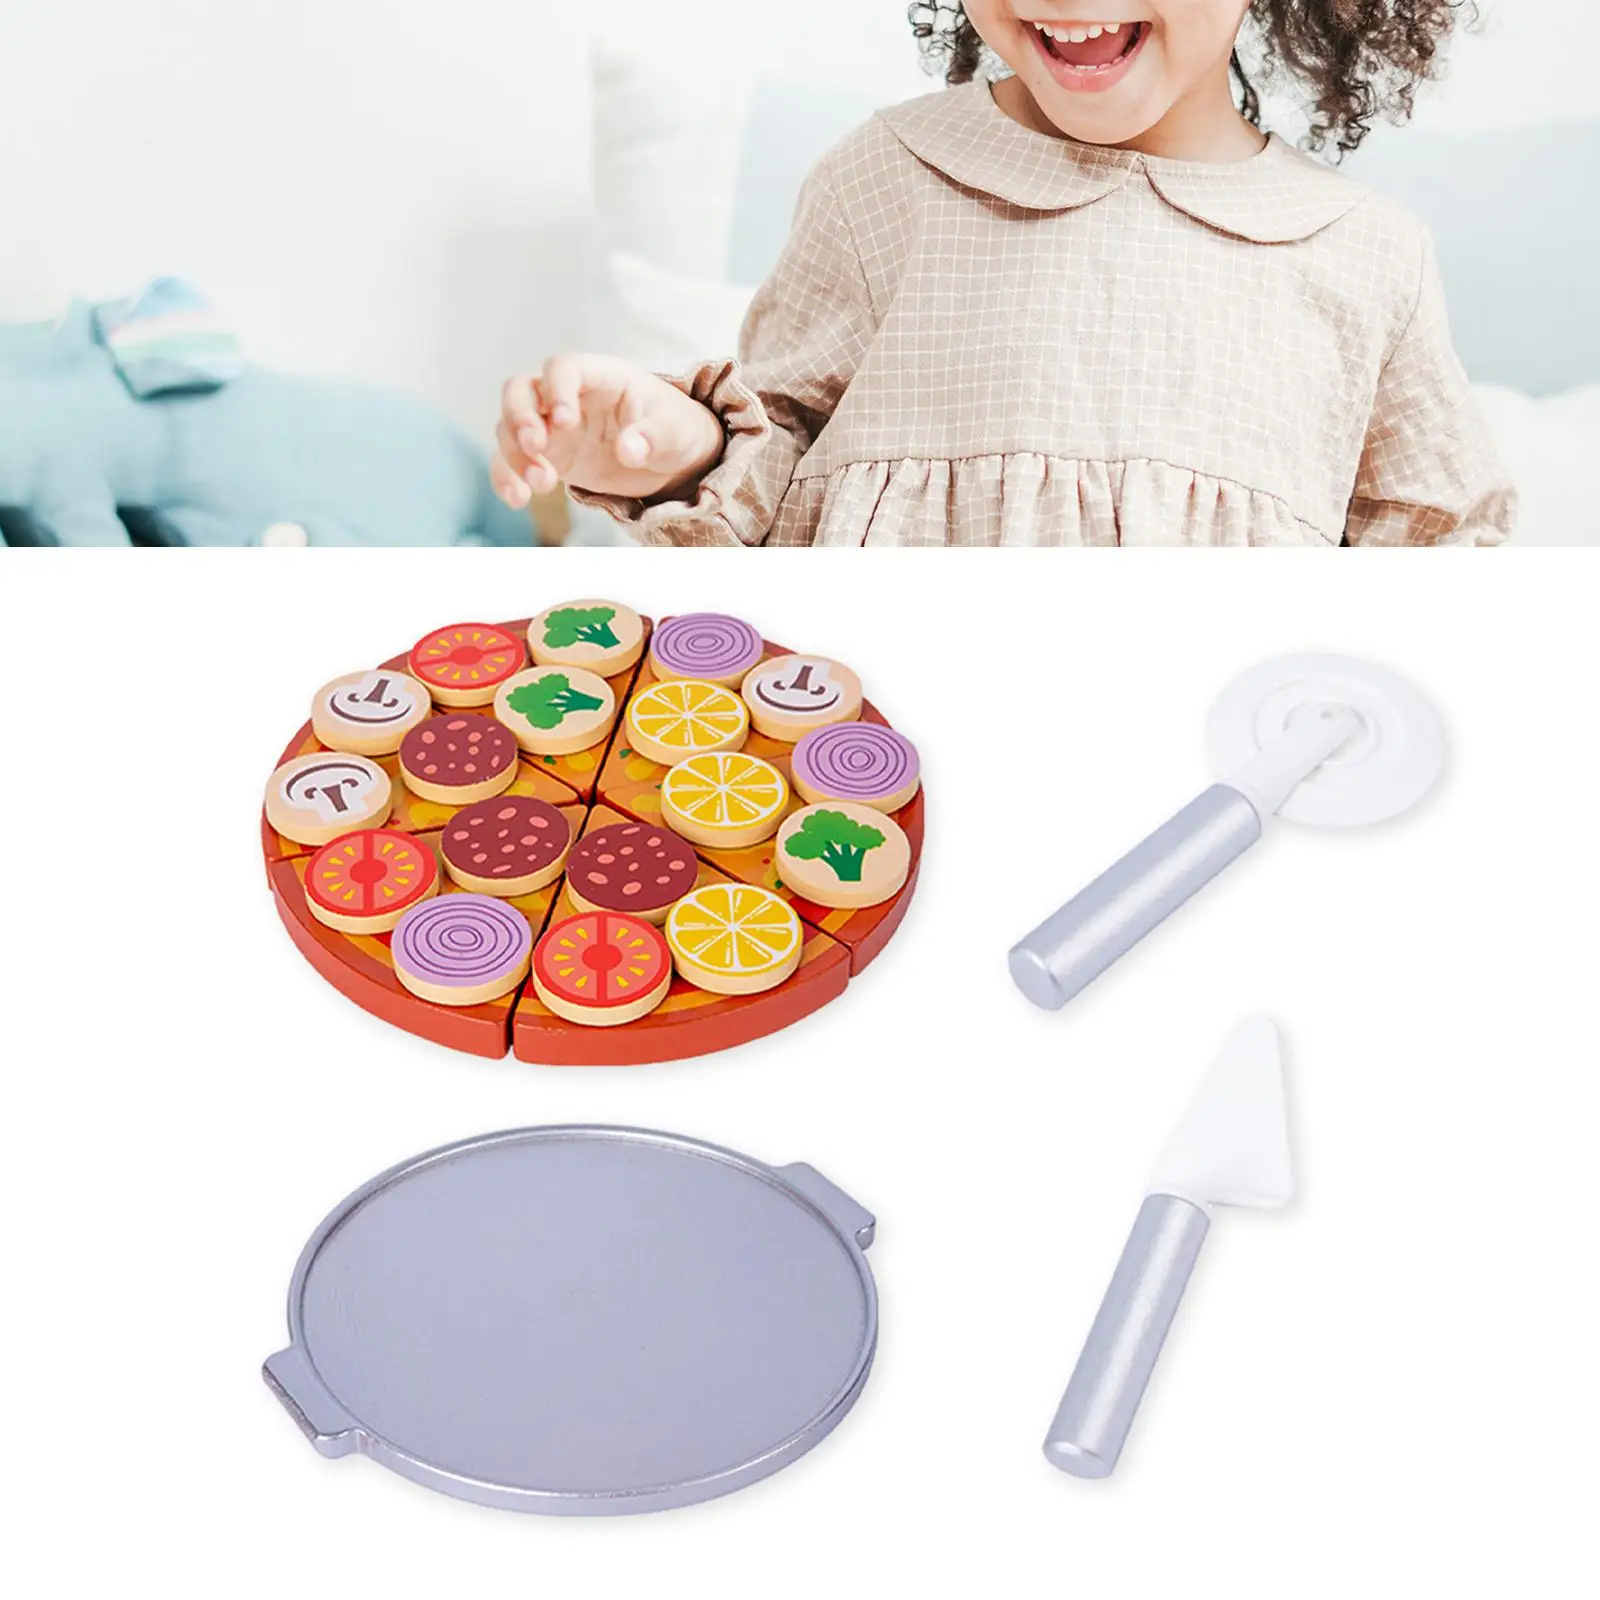 Cutting Play Food Toy for Kitchen Set Wood Kids Cut Play Food Set for Thanksgiving Present New Years Ages 3+ Christmas